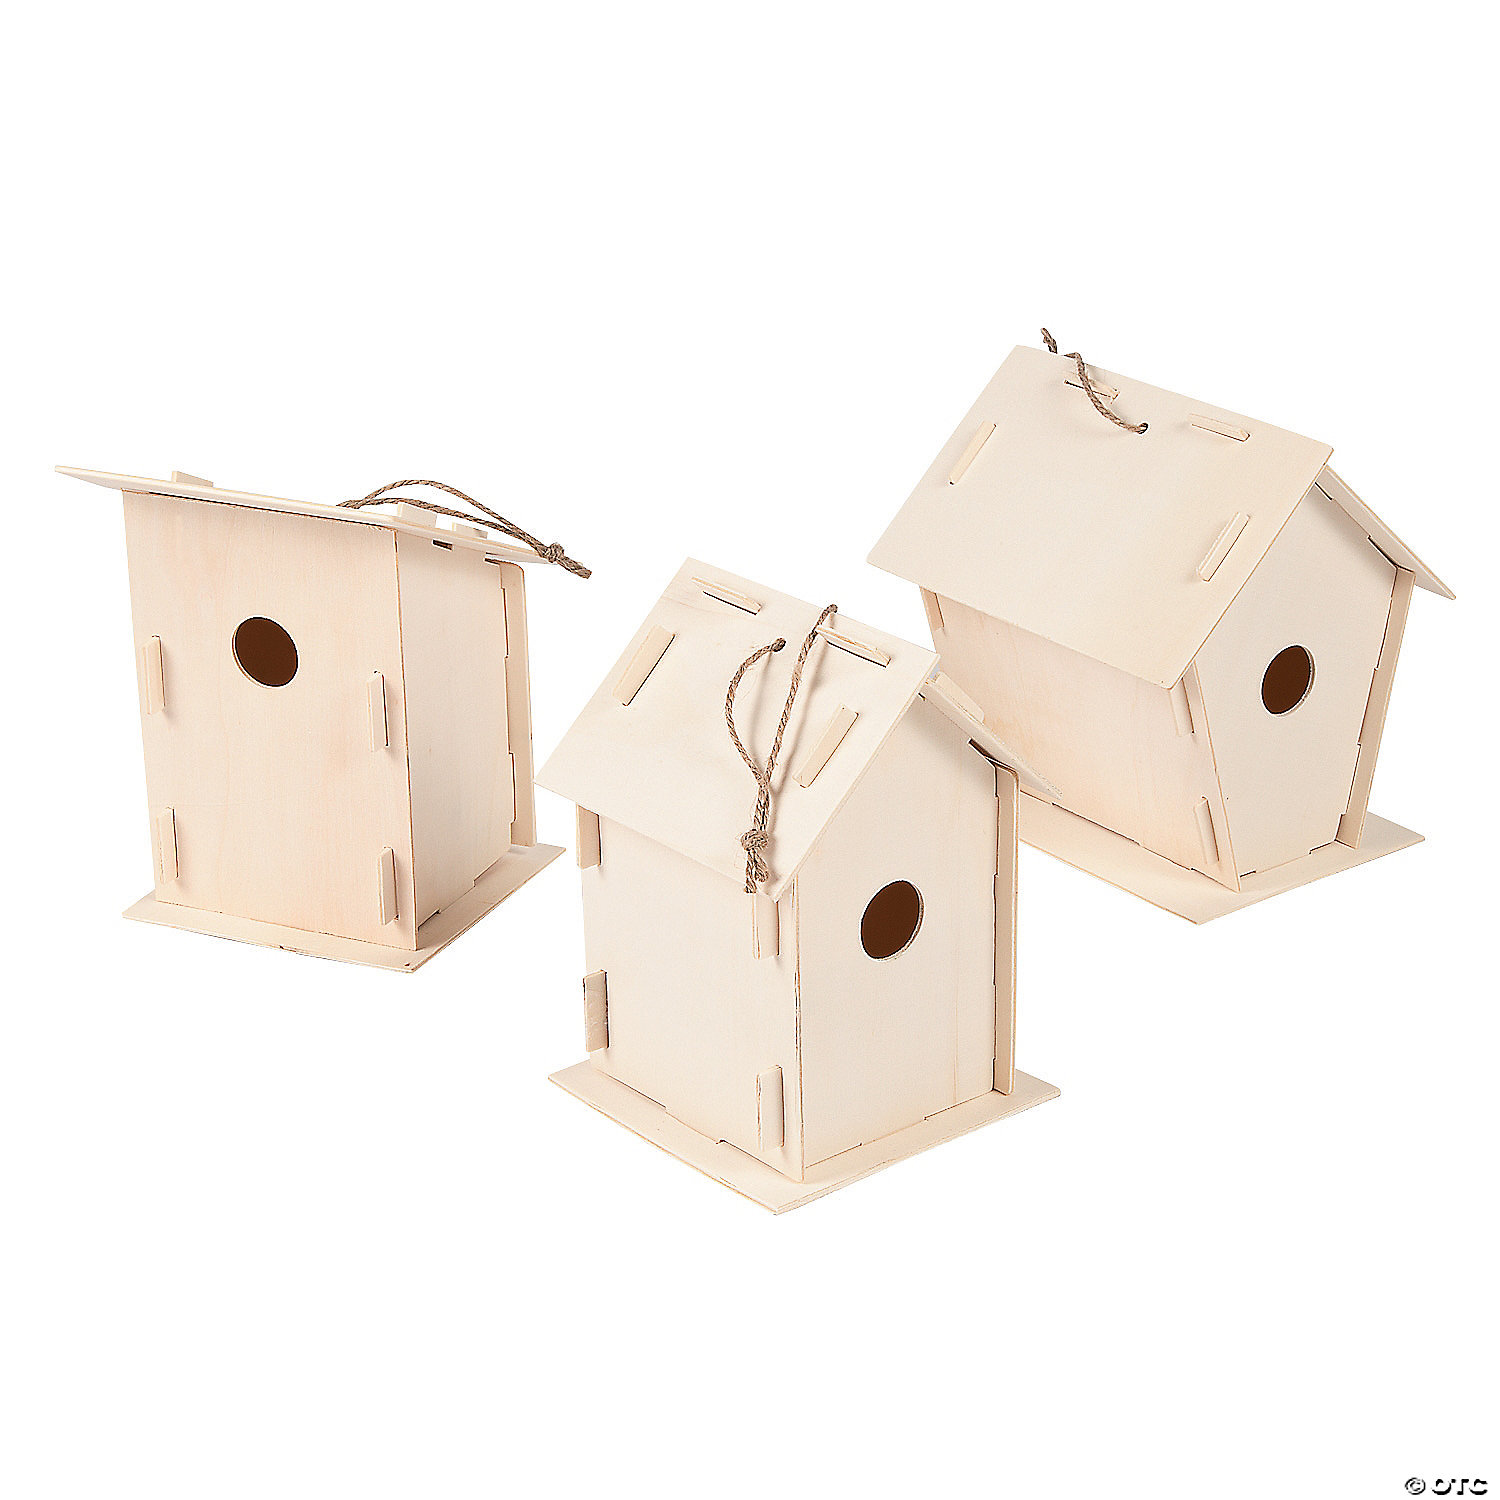 Wooden Bird House for Outside,Bird Nesting Box,Unfinished Paintable